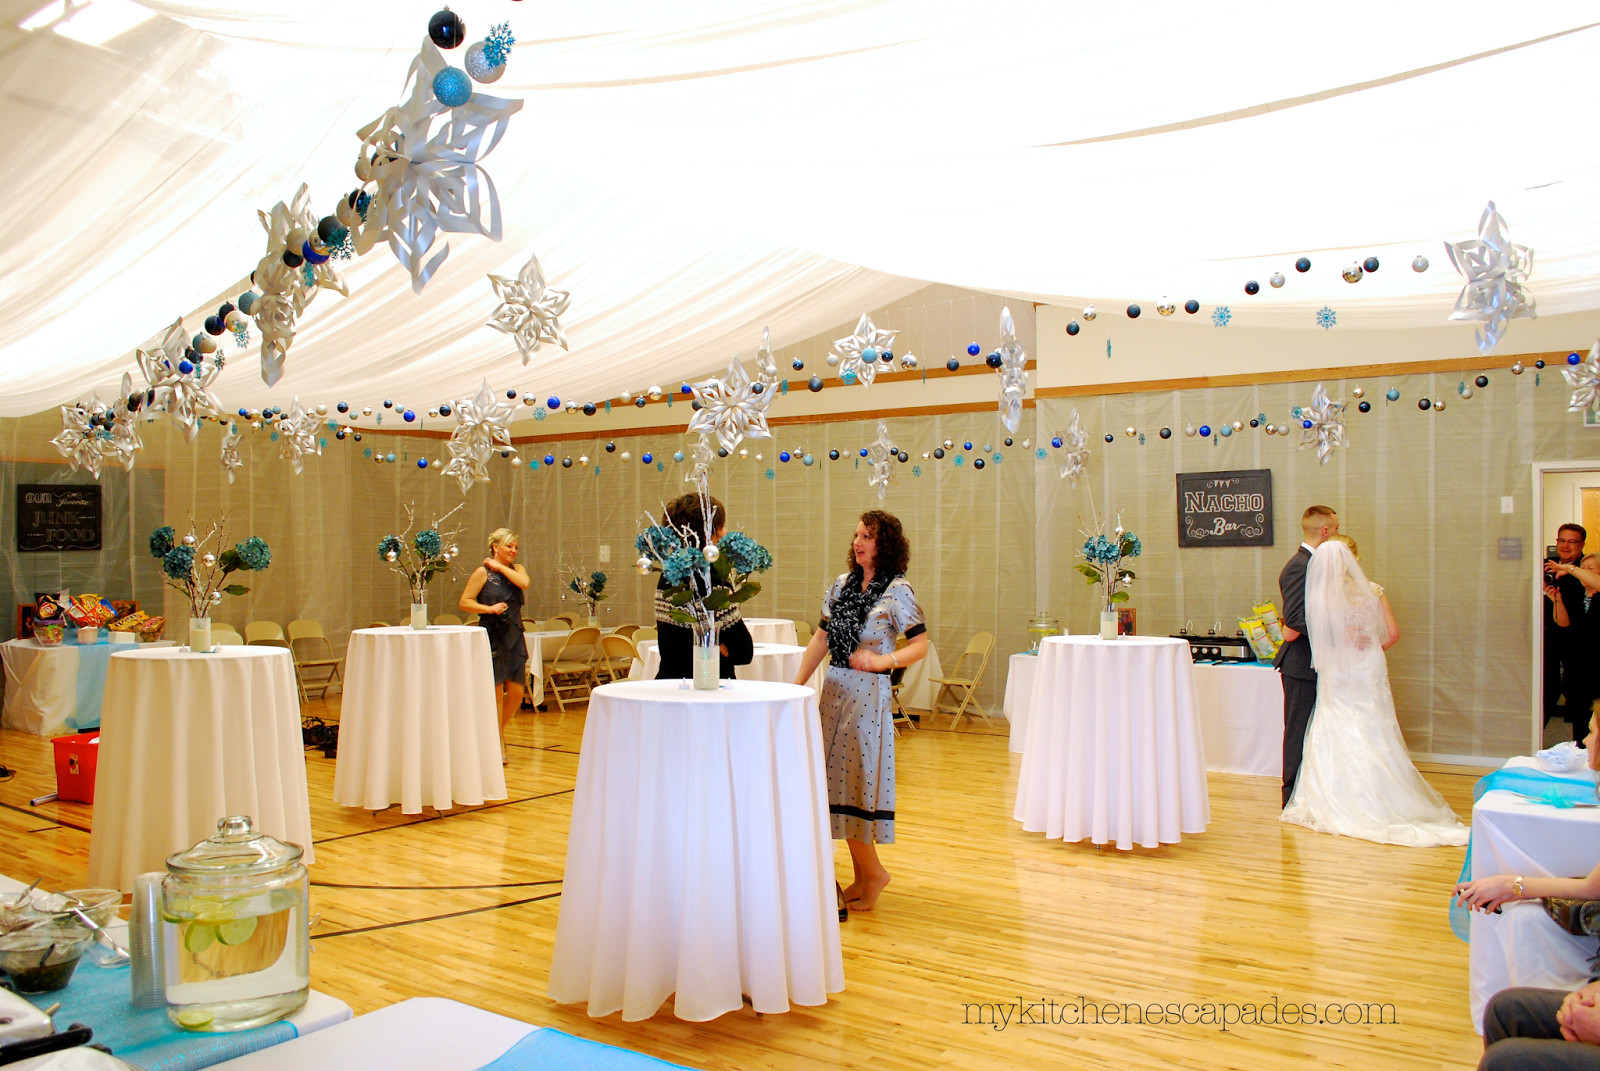 DIY Ceiling Draping For Weddings
 Wedding Ceiling Draping Tutorial How to Measure and Hang